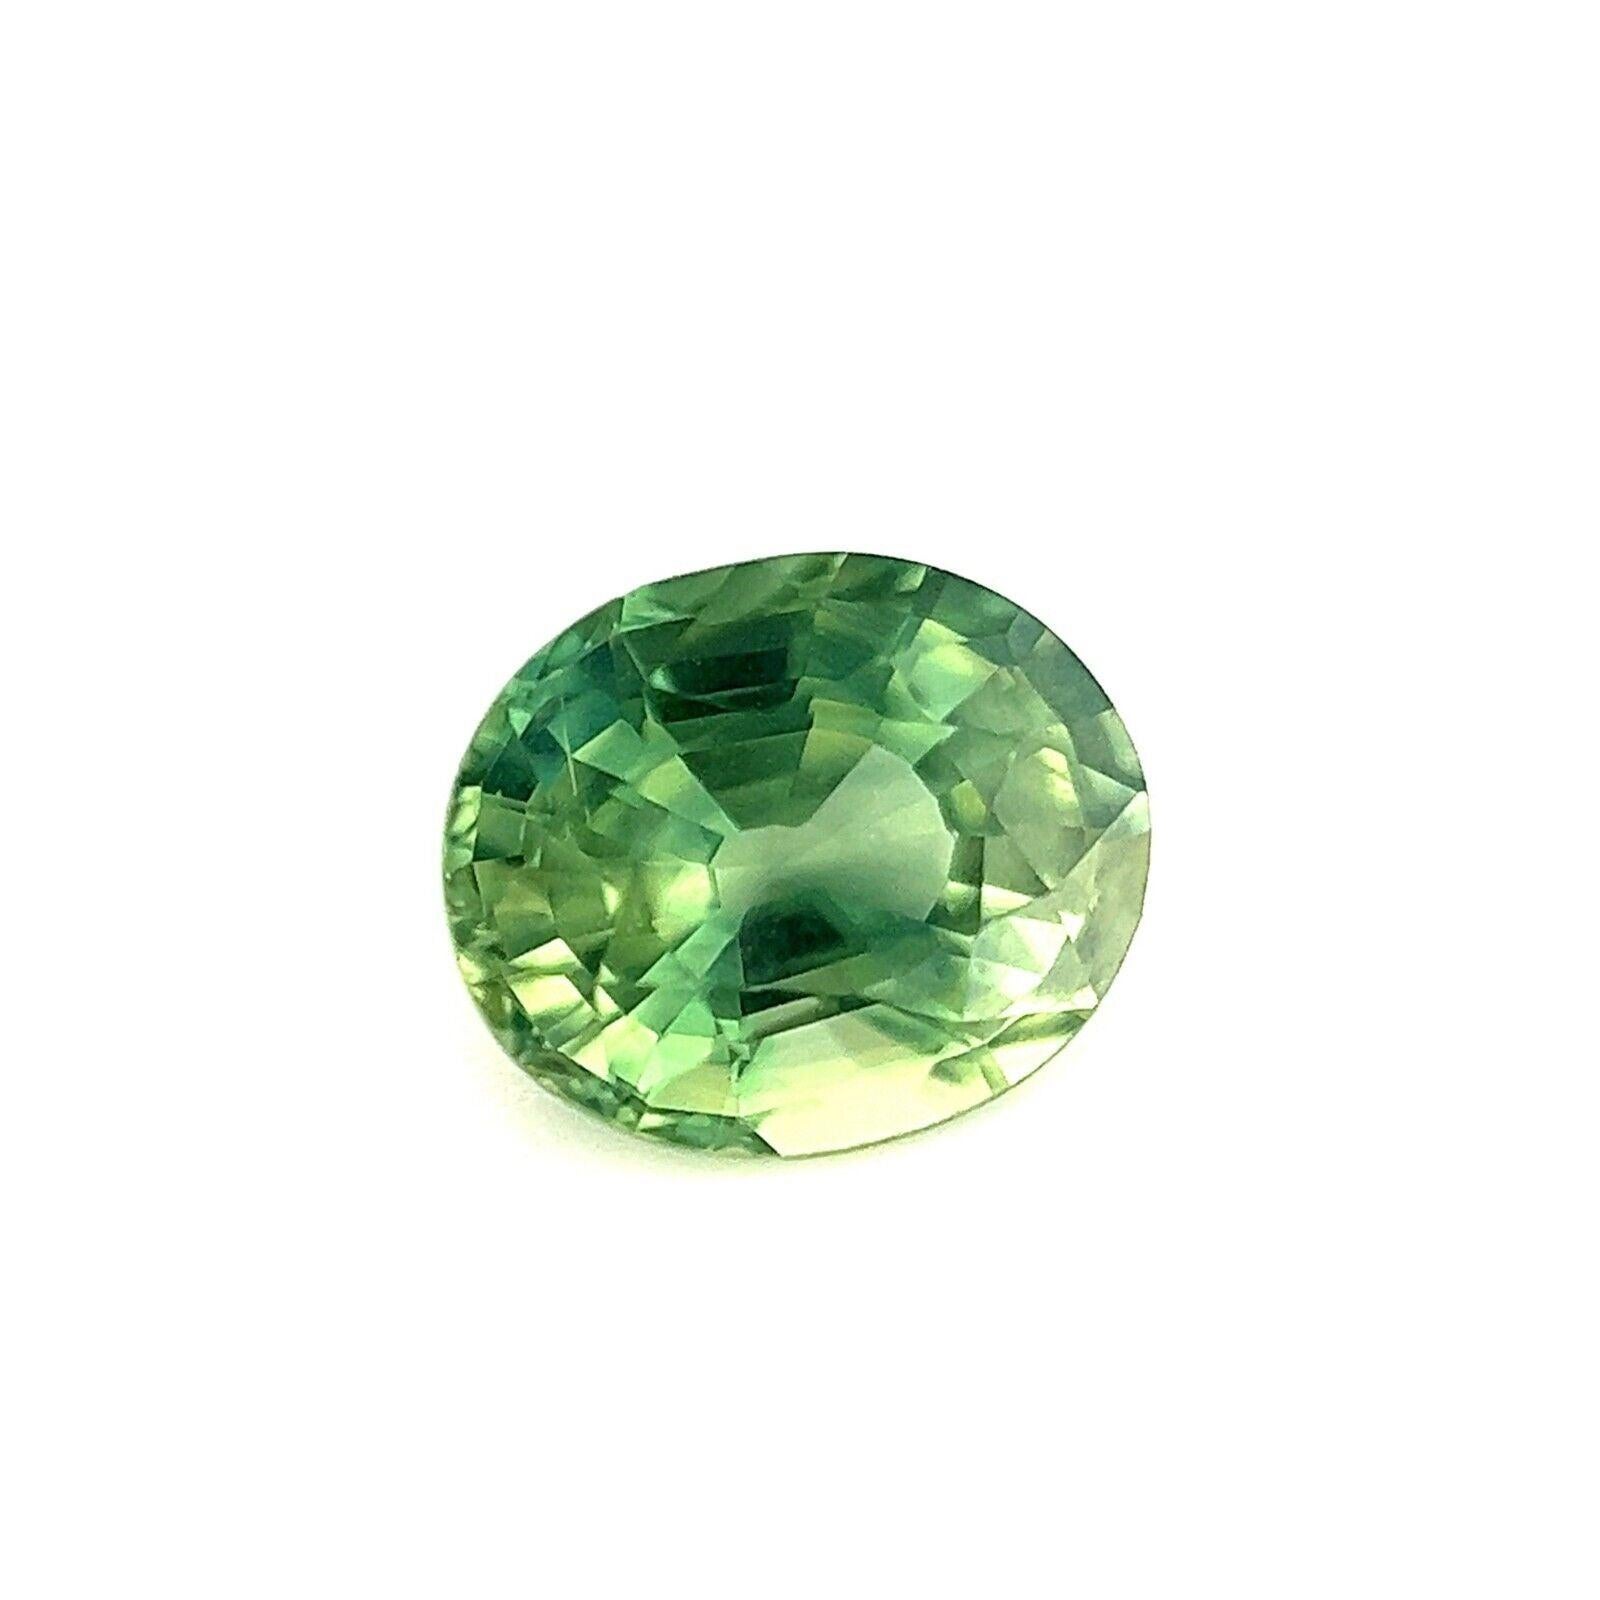 1.29ct Sapphire Natural Vivid Green Oval Cut Loose Rare Gem 6.8x5.6mm VVS

Natural Vivid Green Sapphire Gemstone.
1.29 Carat with a beautiful green colour and an excellent oval cut. Also has excellent clarity, very clean stone. Measures 6.8 x 5.6 x